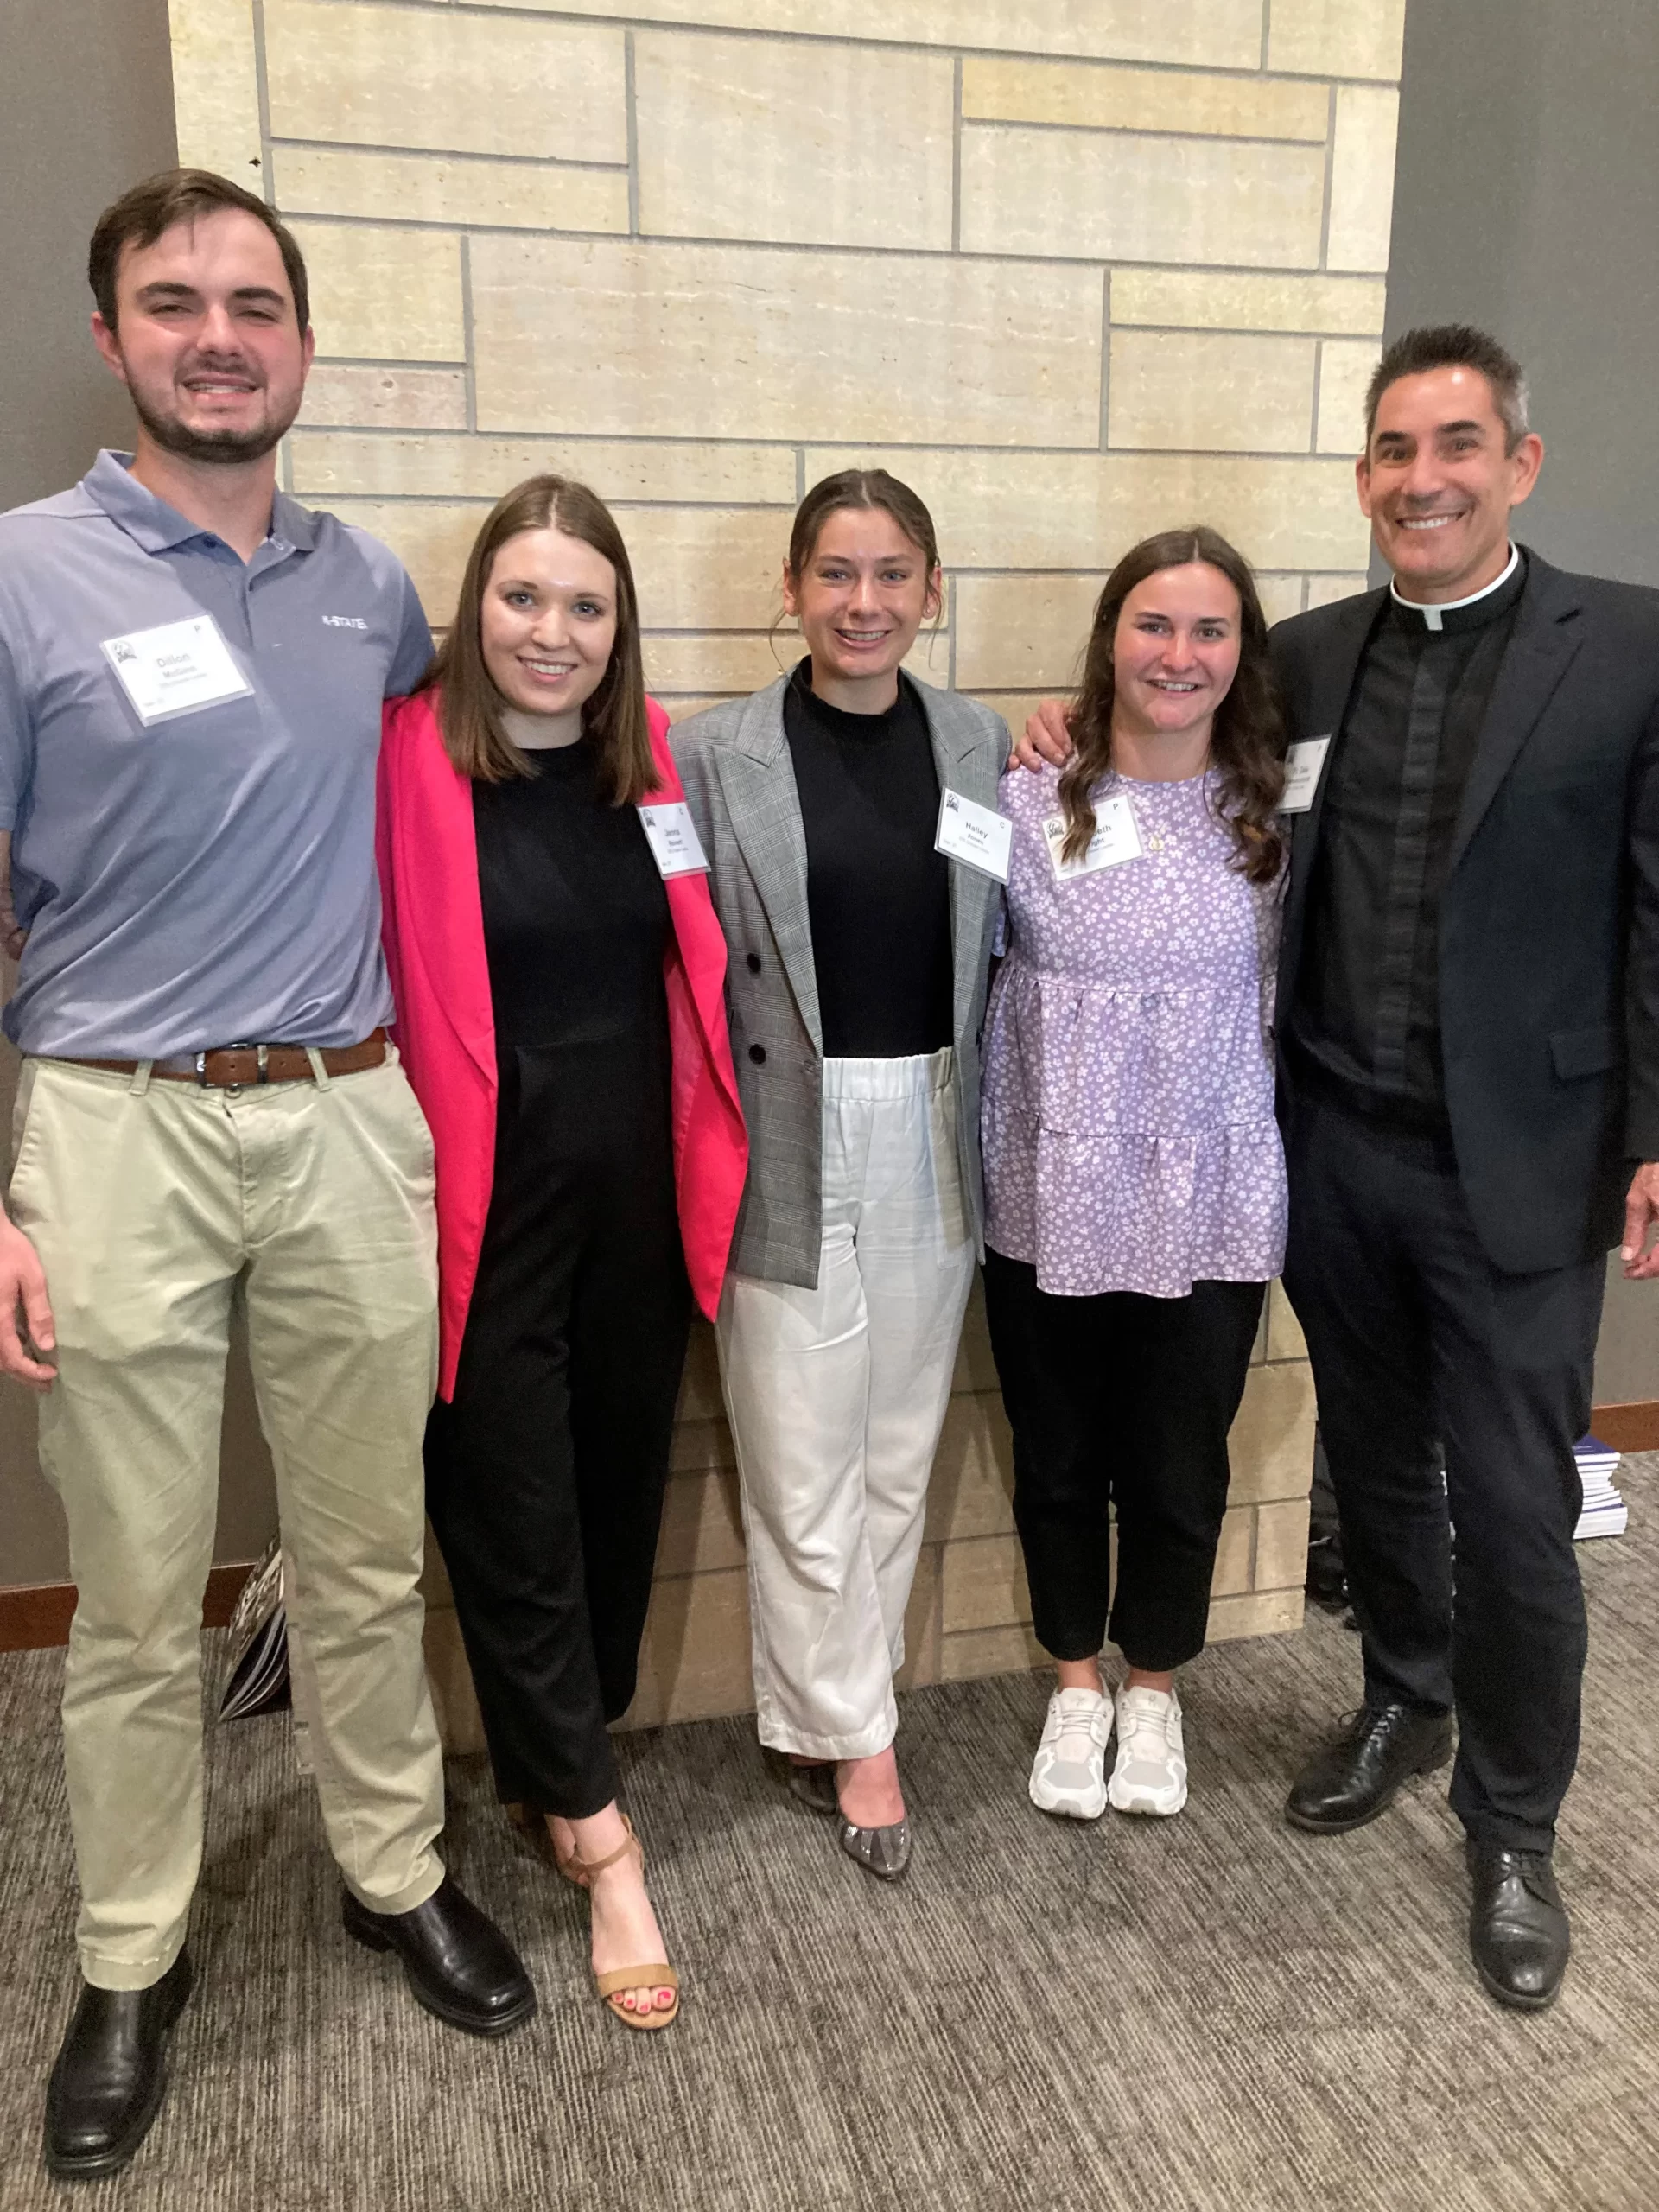 Kansas State University students, from left: junior Dillon McGinn, 20; junior Jenna Reinert, 21; senior Halley Jones, 21; Elizabeth Wright, 22, (a 2023 graduate who started a Catholic Rural Life chapter in 2021); and Father Gale Hammerschmidt, pastor and chaplain at St. Isidore’s on campus. Credit: Susan Klemond/CNA